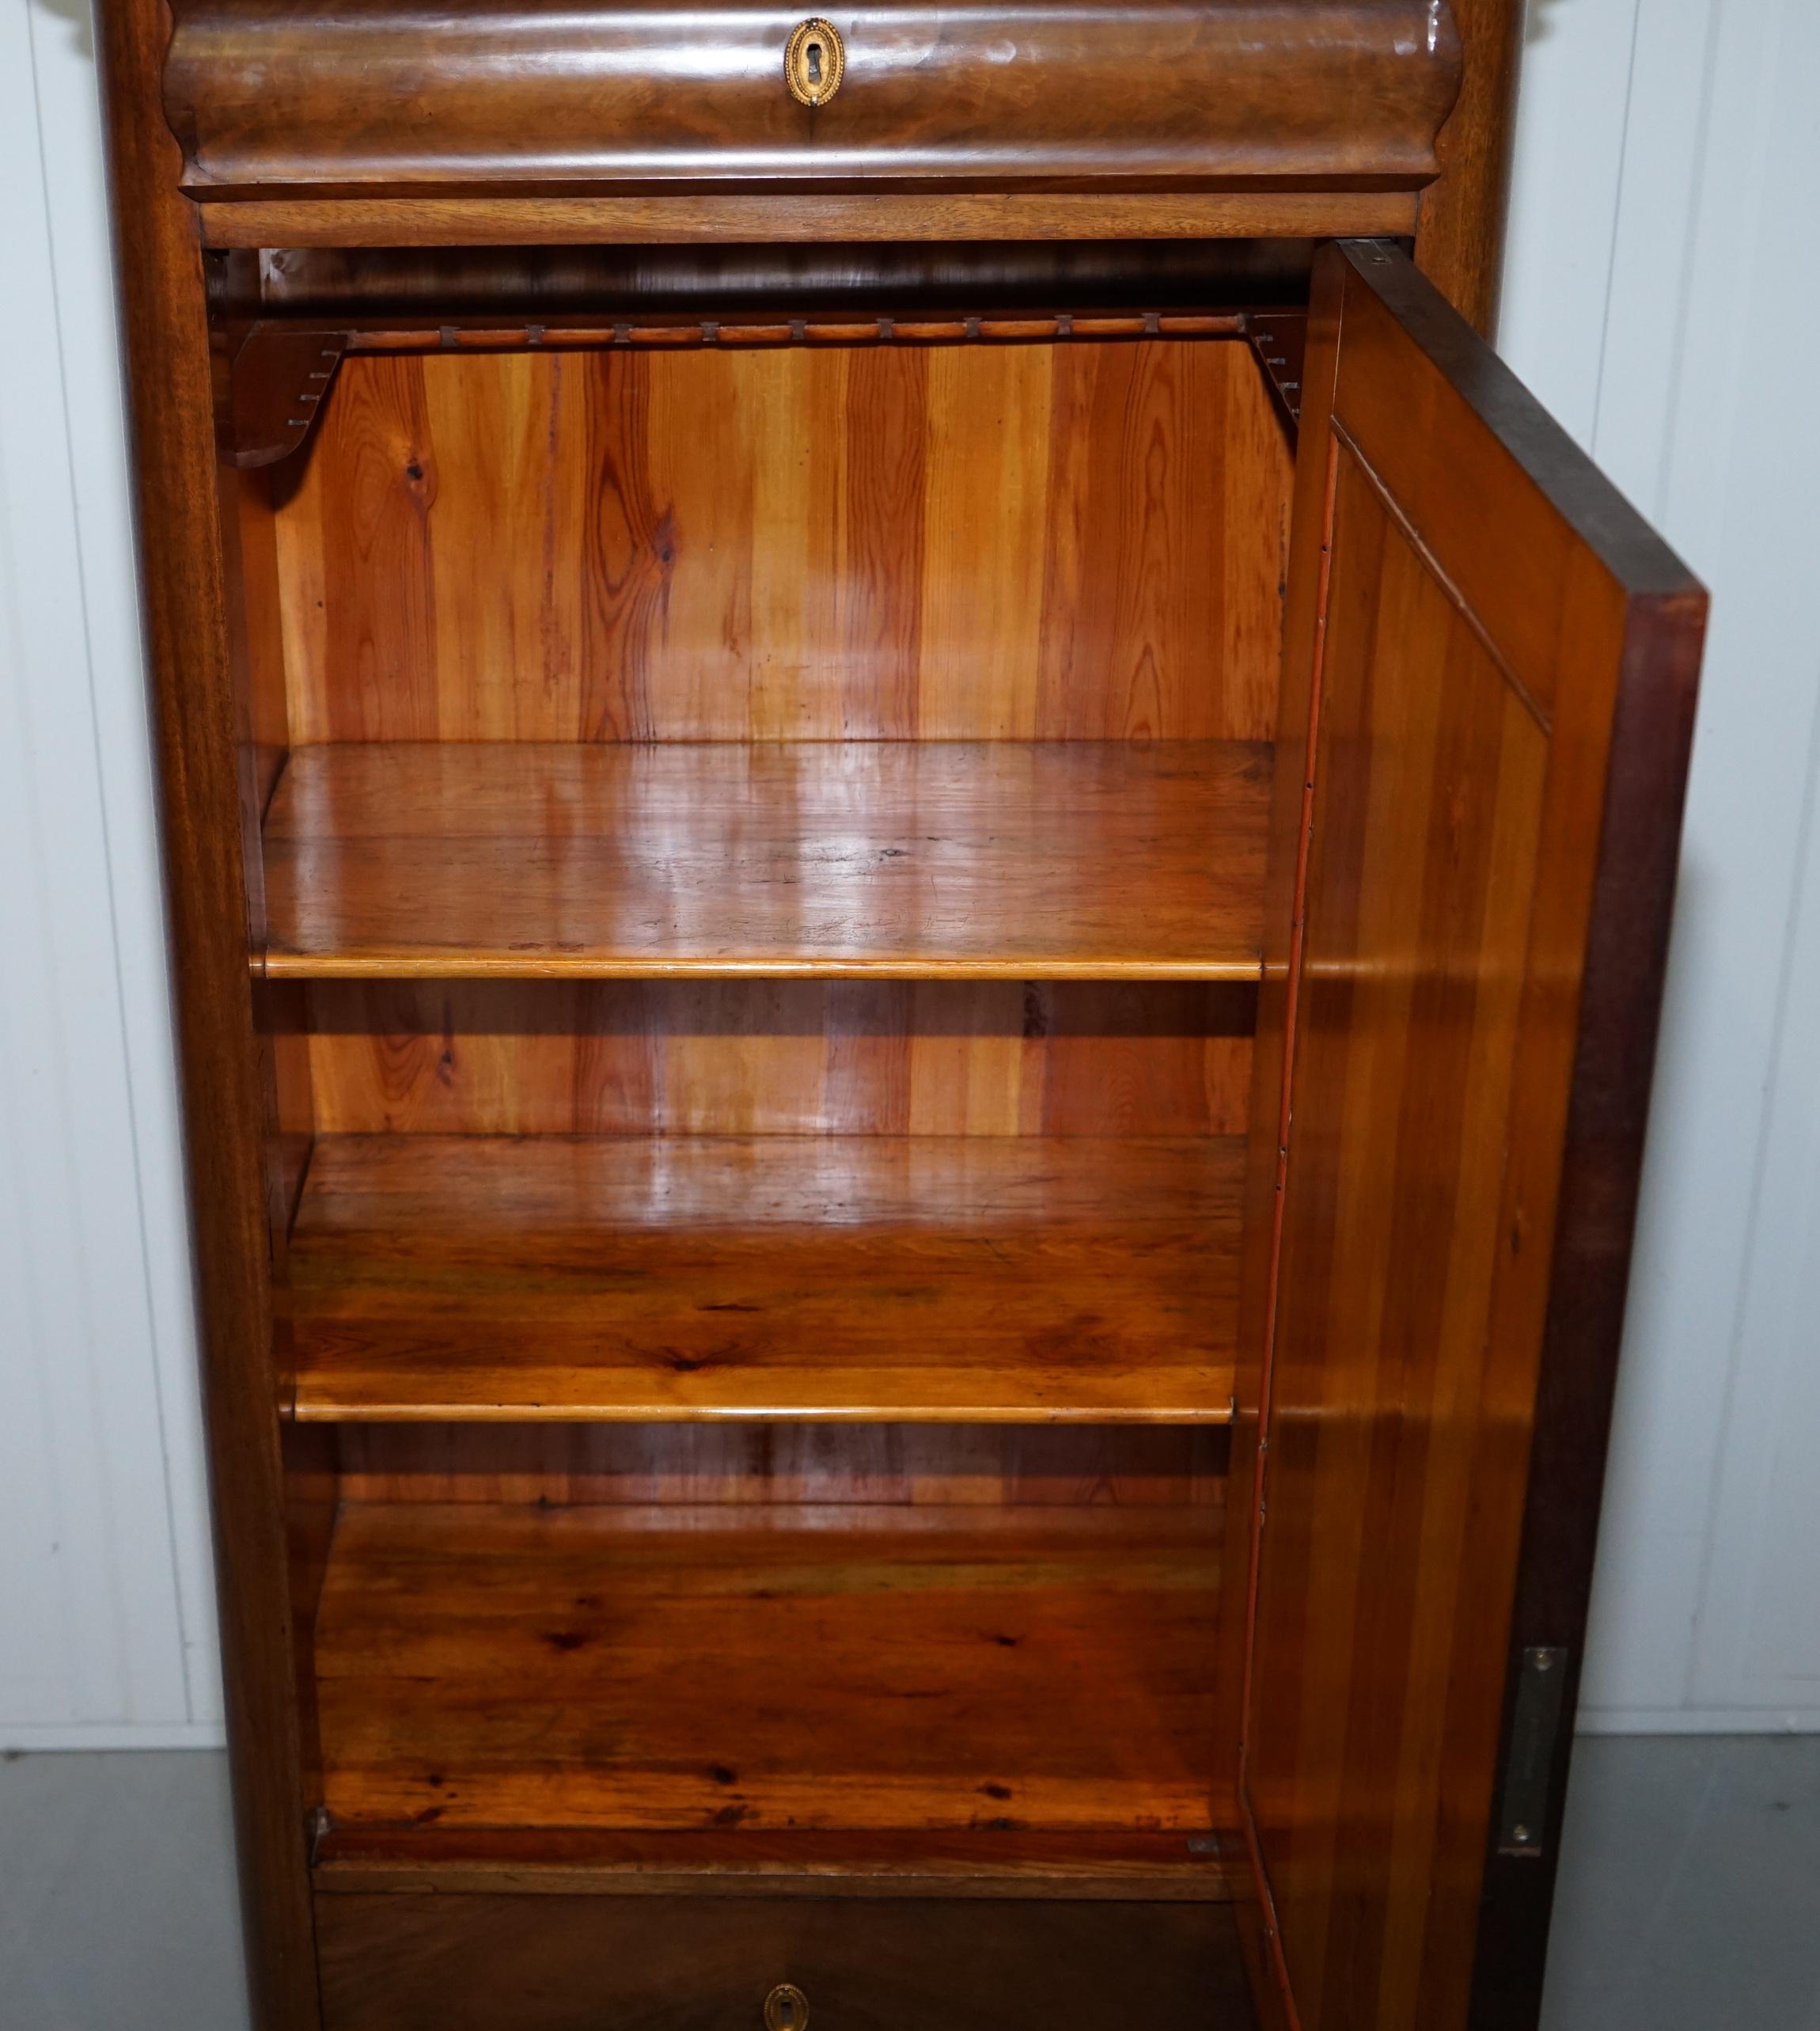 Lovely Walnut Drinks Cabinet with Drawers and Built in Glass Holder Great Find 12